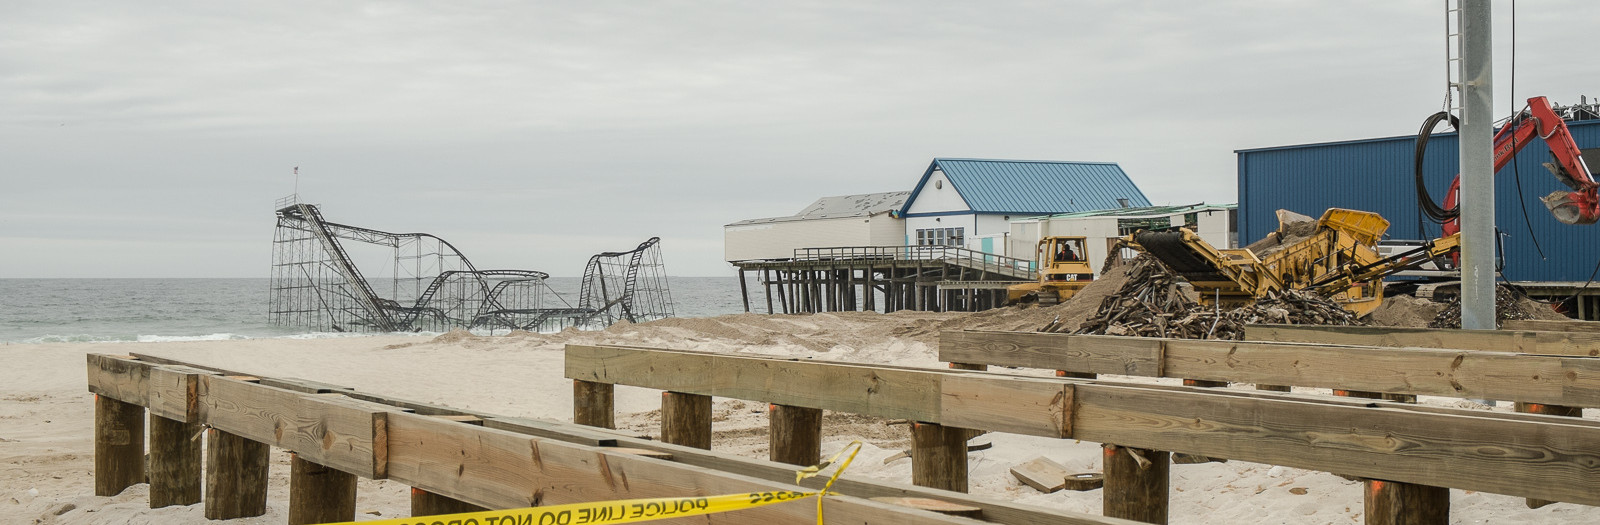 Seaside Heights : Six after Sandy | Street | April 2013 | New Jersey